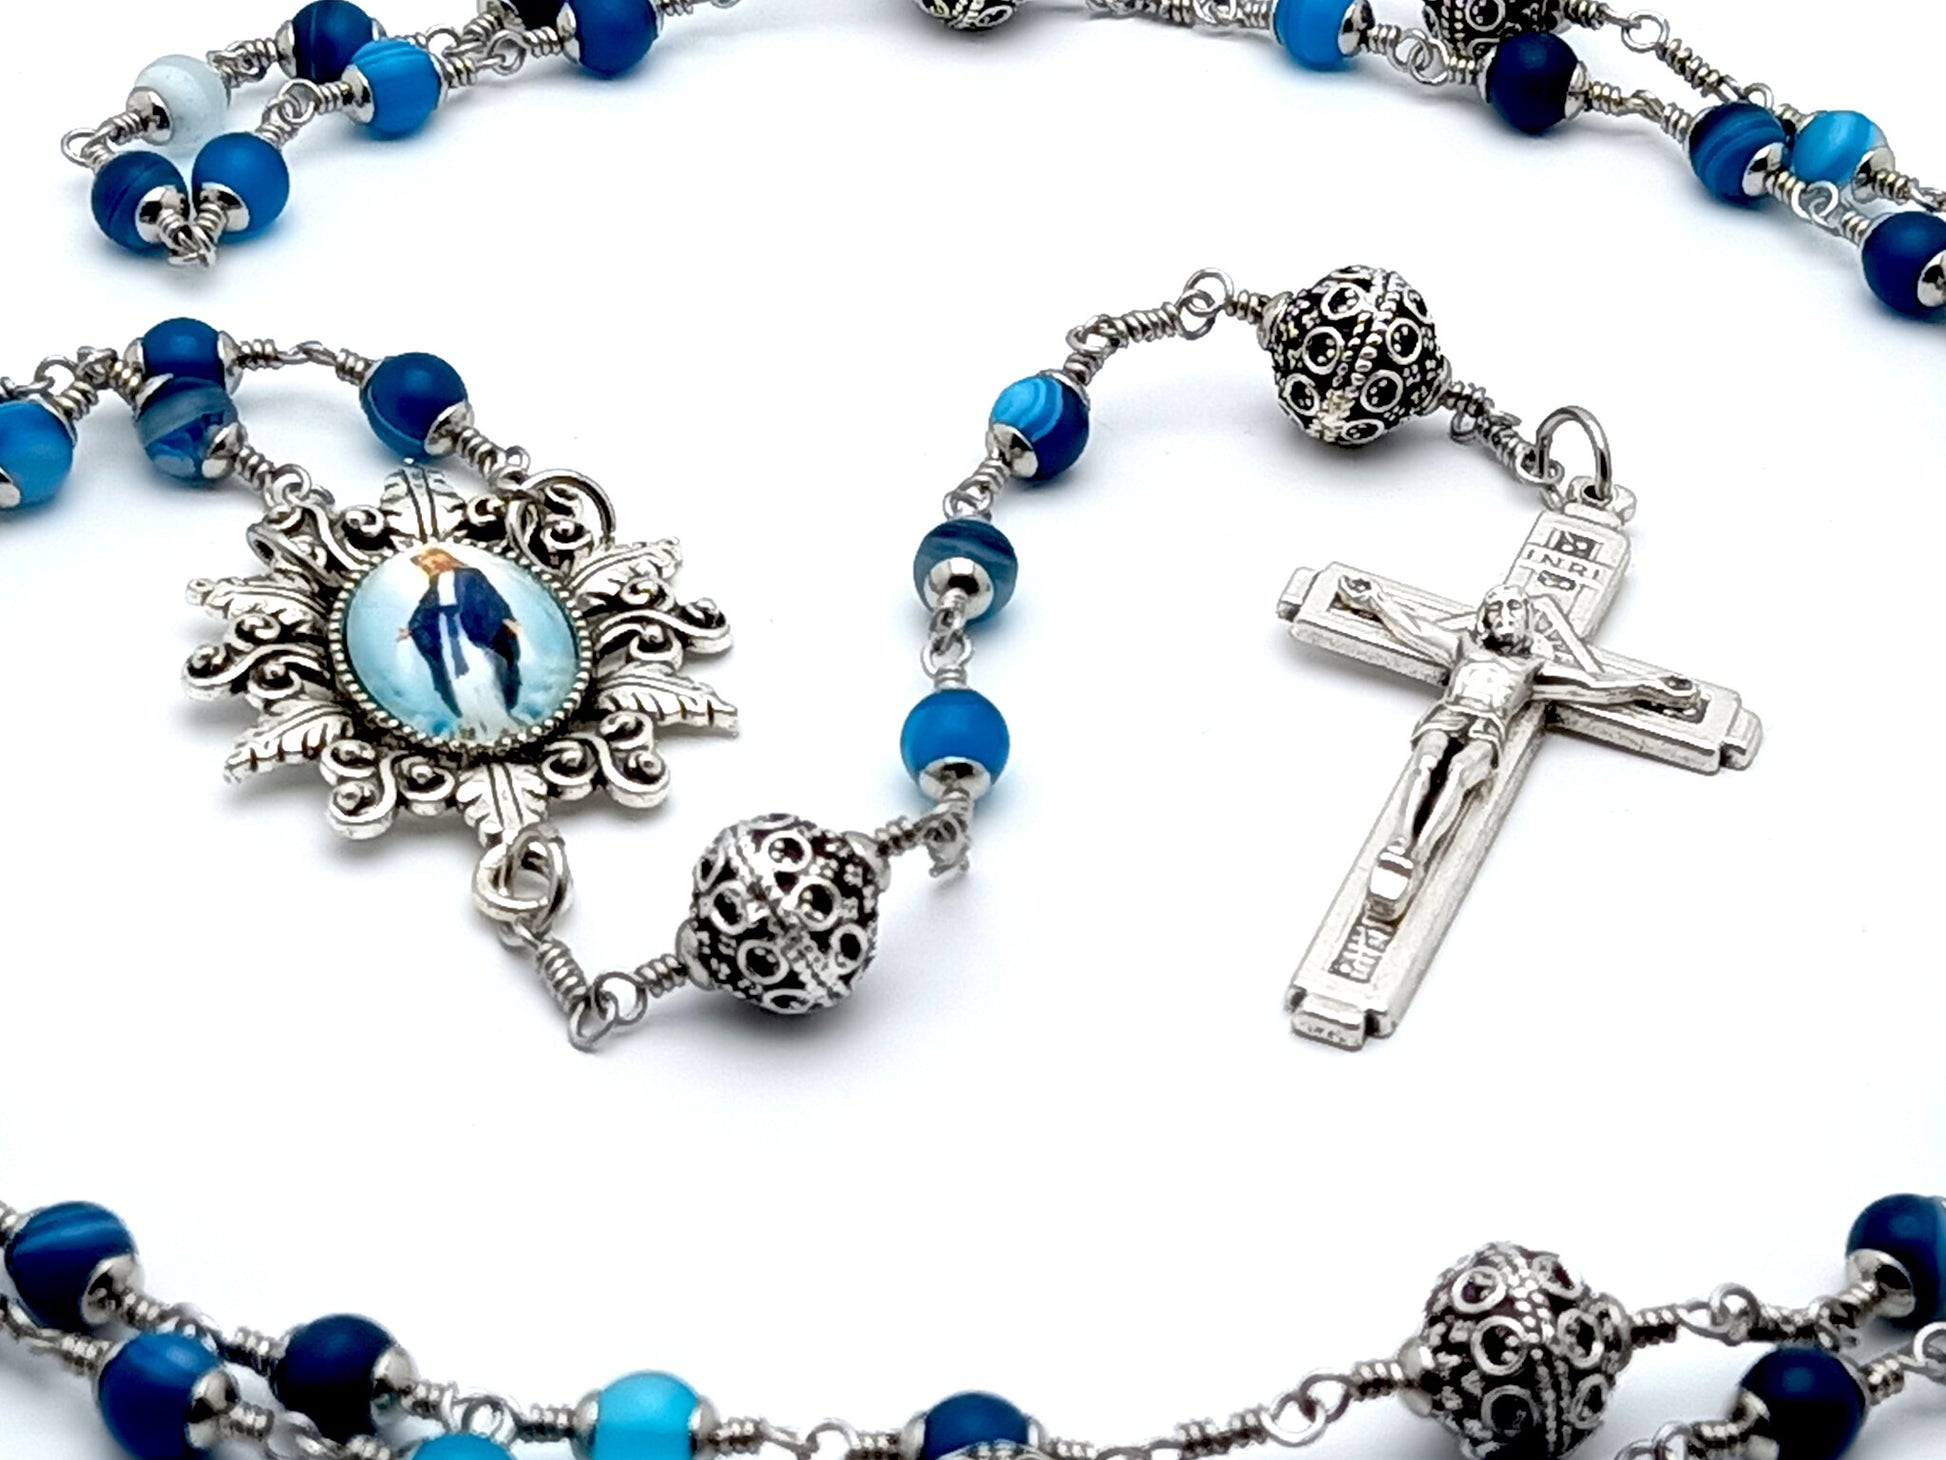 Our Lady of Grace unbeakable unique rosary beads with blue frosted agate gemstone beads and silver pater beads, picture centre medal and crucifix.